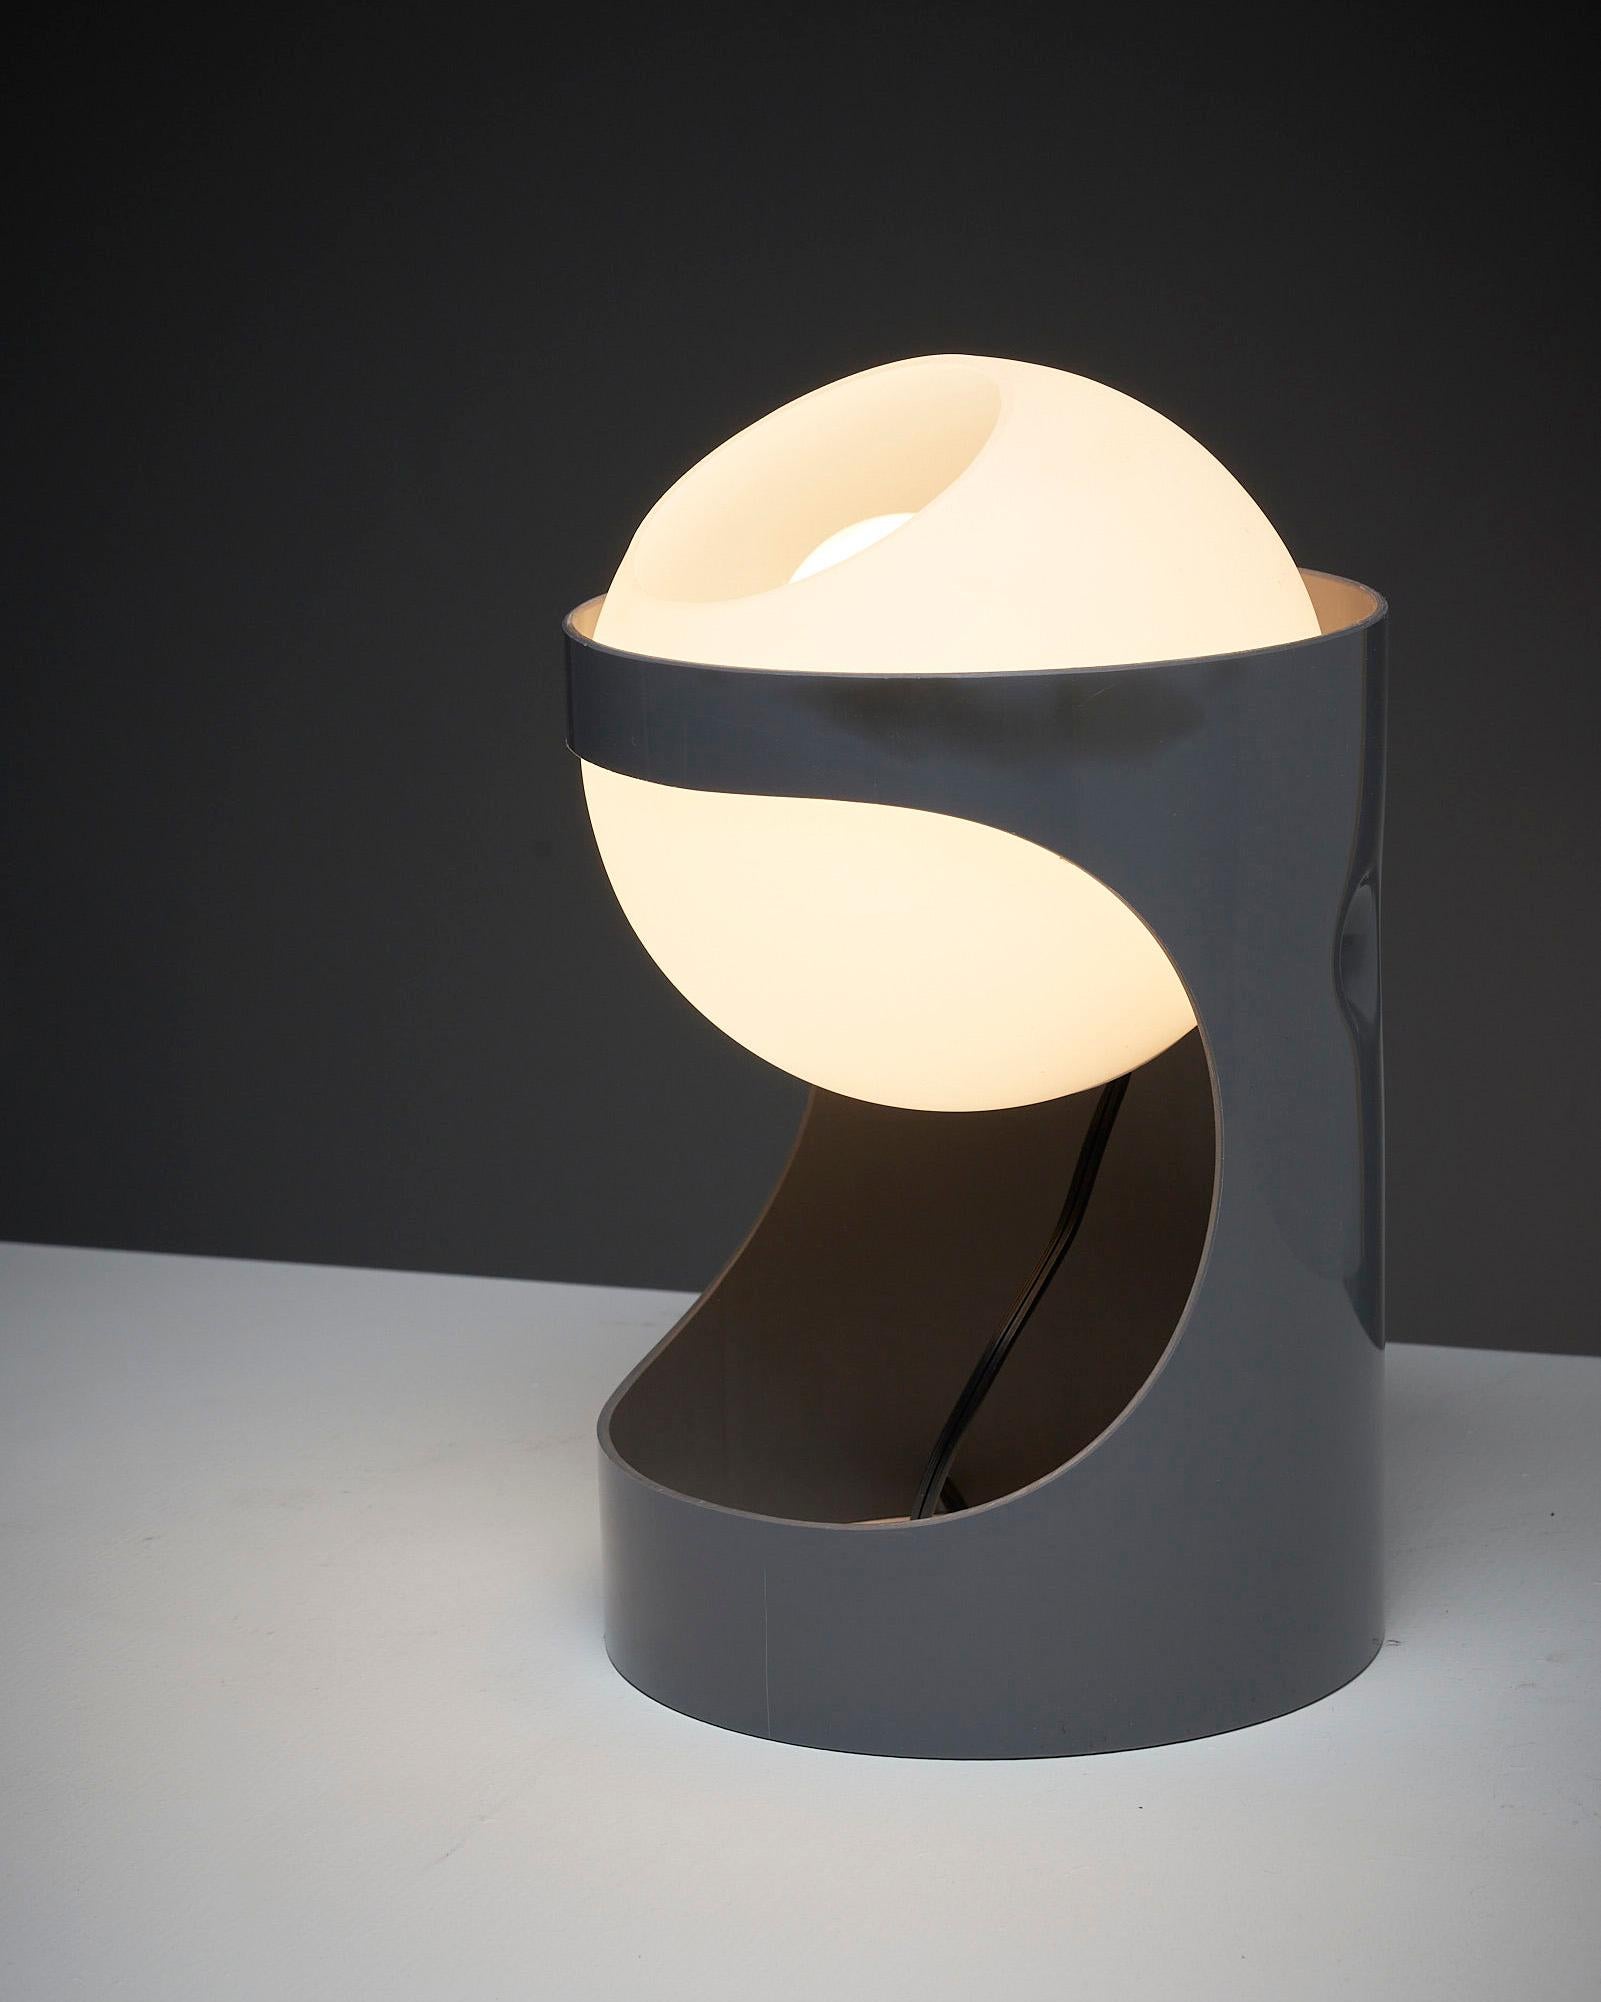 'L1 Guggerli' Table Lamp by Rico and Rosemarie for Baltensweiler AG: Add a touch of space-age charm to your space with the 'L1 Guggerli' Table Lamp. Created by Rico and Rosemarie, this lamp showcases a unique design that combines form and function